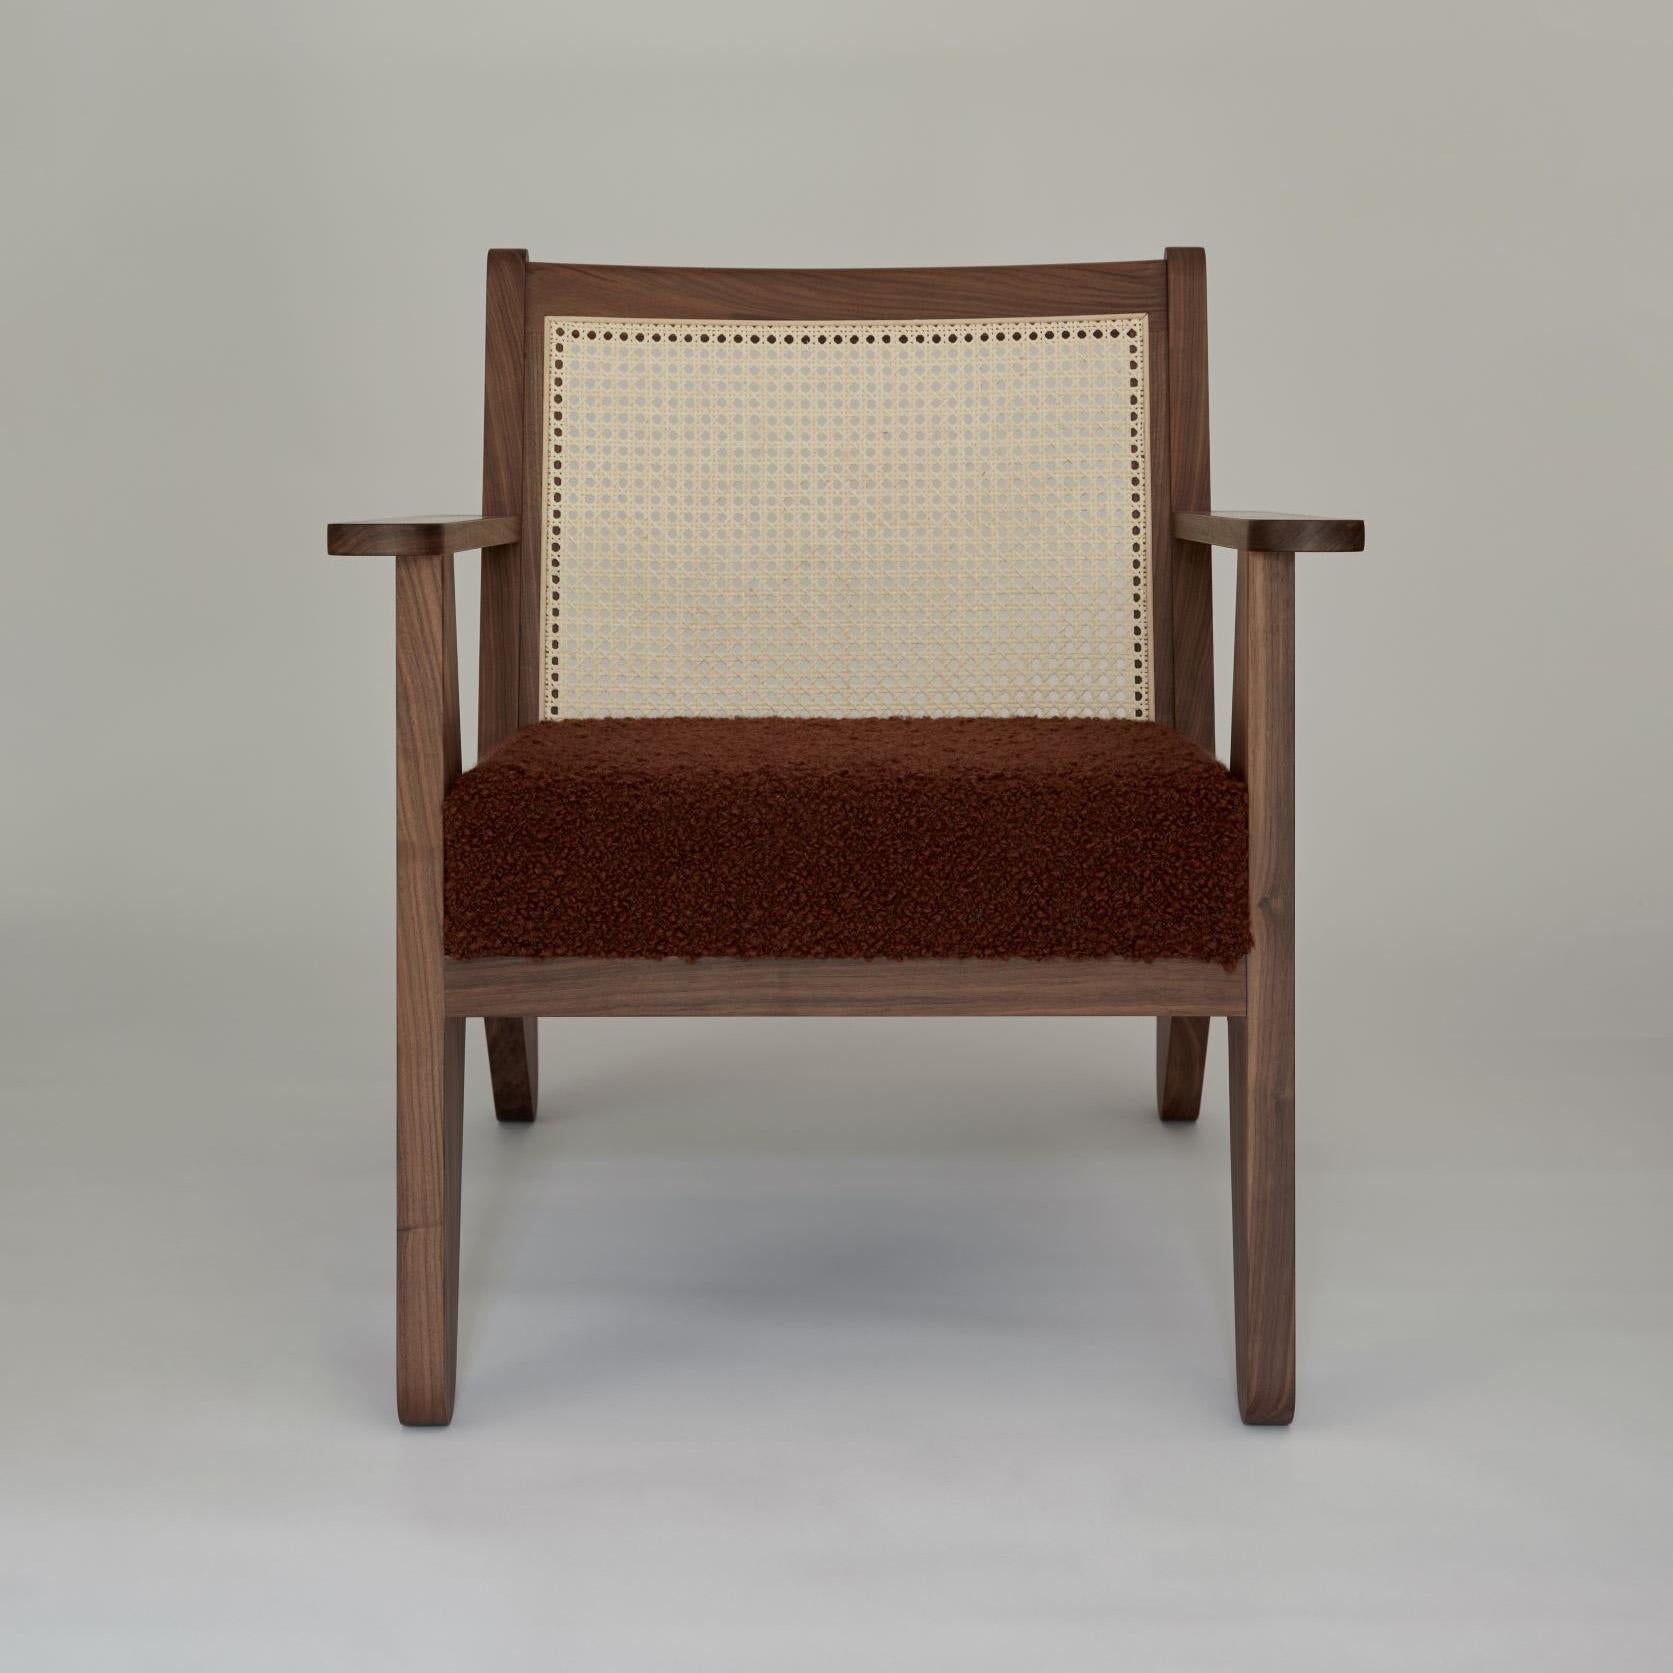 Daniel Boddam Studio’s Booham chair with arms, brings together contemporary and modernist influences overlaid with Boddam’s signature Australian sensibility.

Working in the great traditions of Charlotte Perriand and Pierre Jeanneret, the Booham